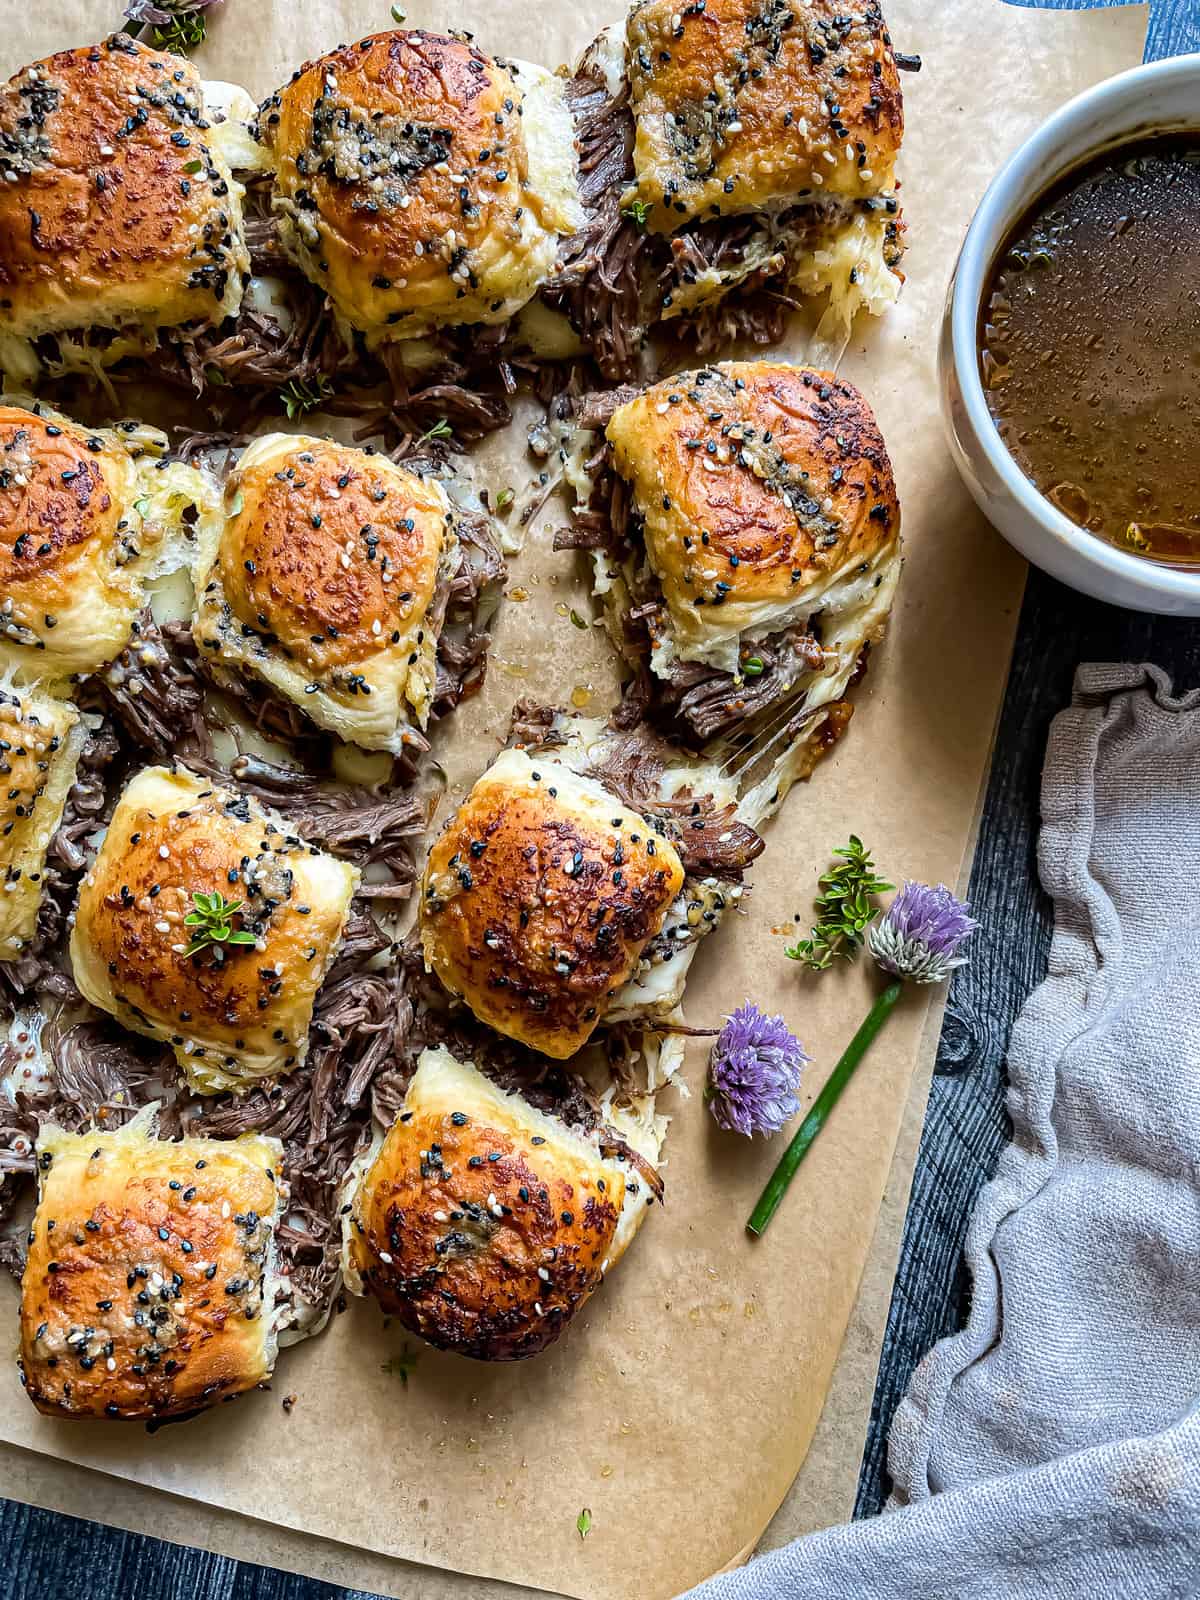 Instant Pot French Dip Sliders, pulled apart and garnished with fresh thyme, chive blossoms, and au jus.